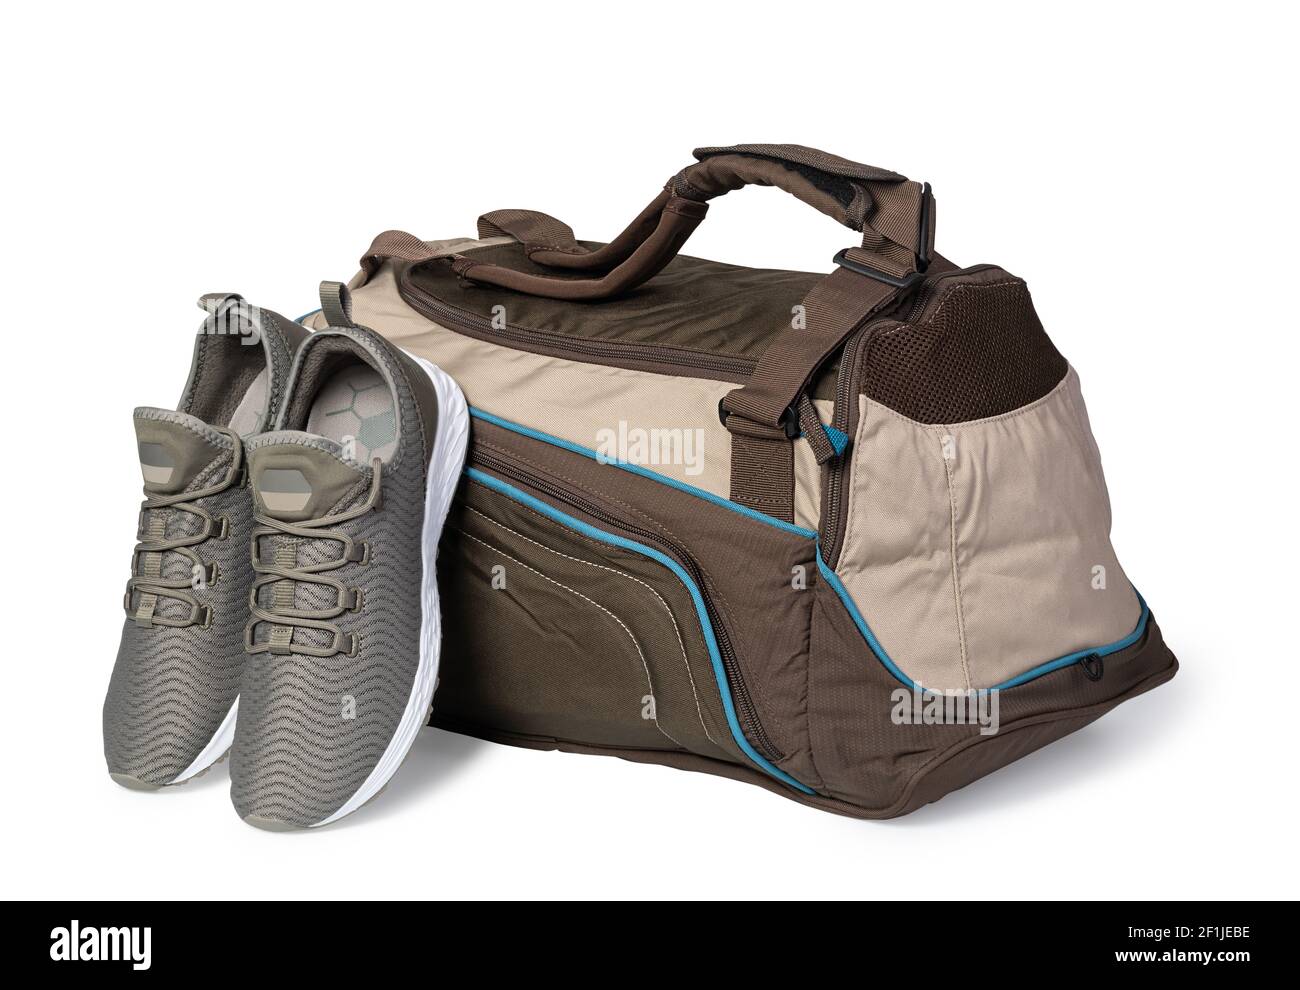 Sports bag and sneakers Stock Photo